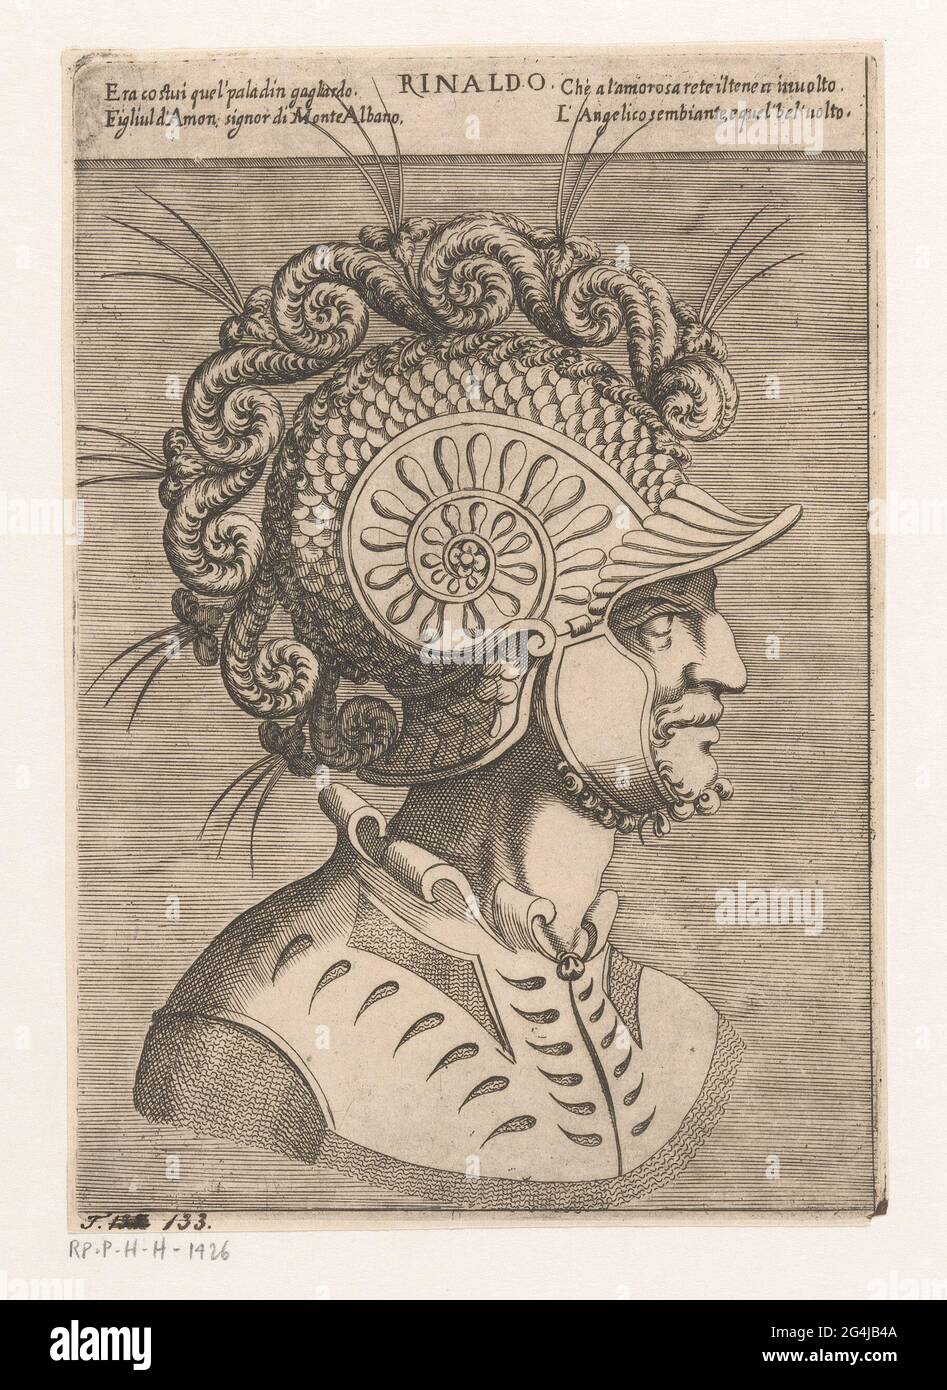 Bust of rinaldo; Rinaldo; Characters from 'Orlando Furioso'. Bust of  Rinaldo, a character from Ludovico Ariosto's epic 'Orlando Furioso'. On his  head, he wears a helmet decorated with scales, plumes of feathers